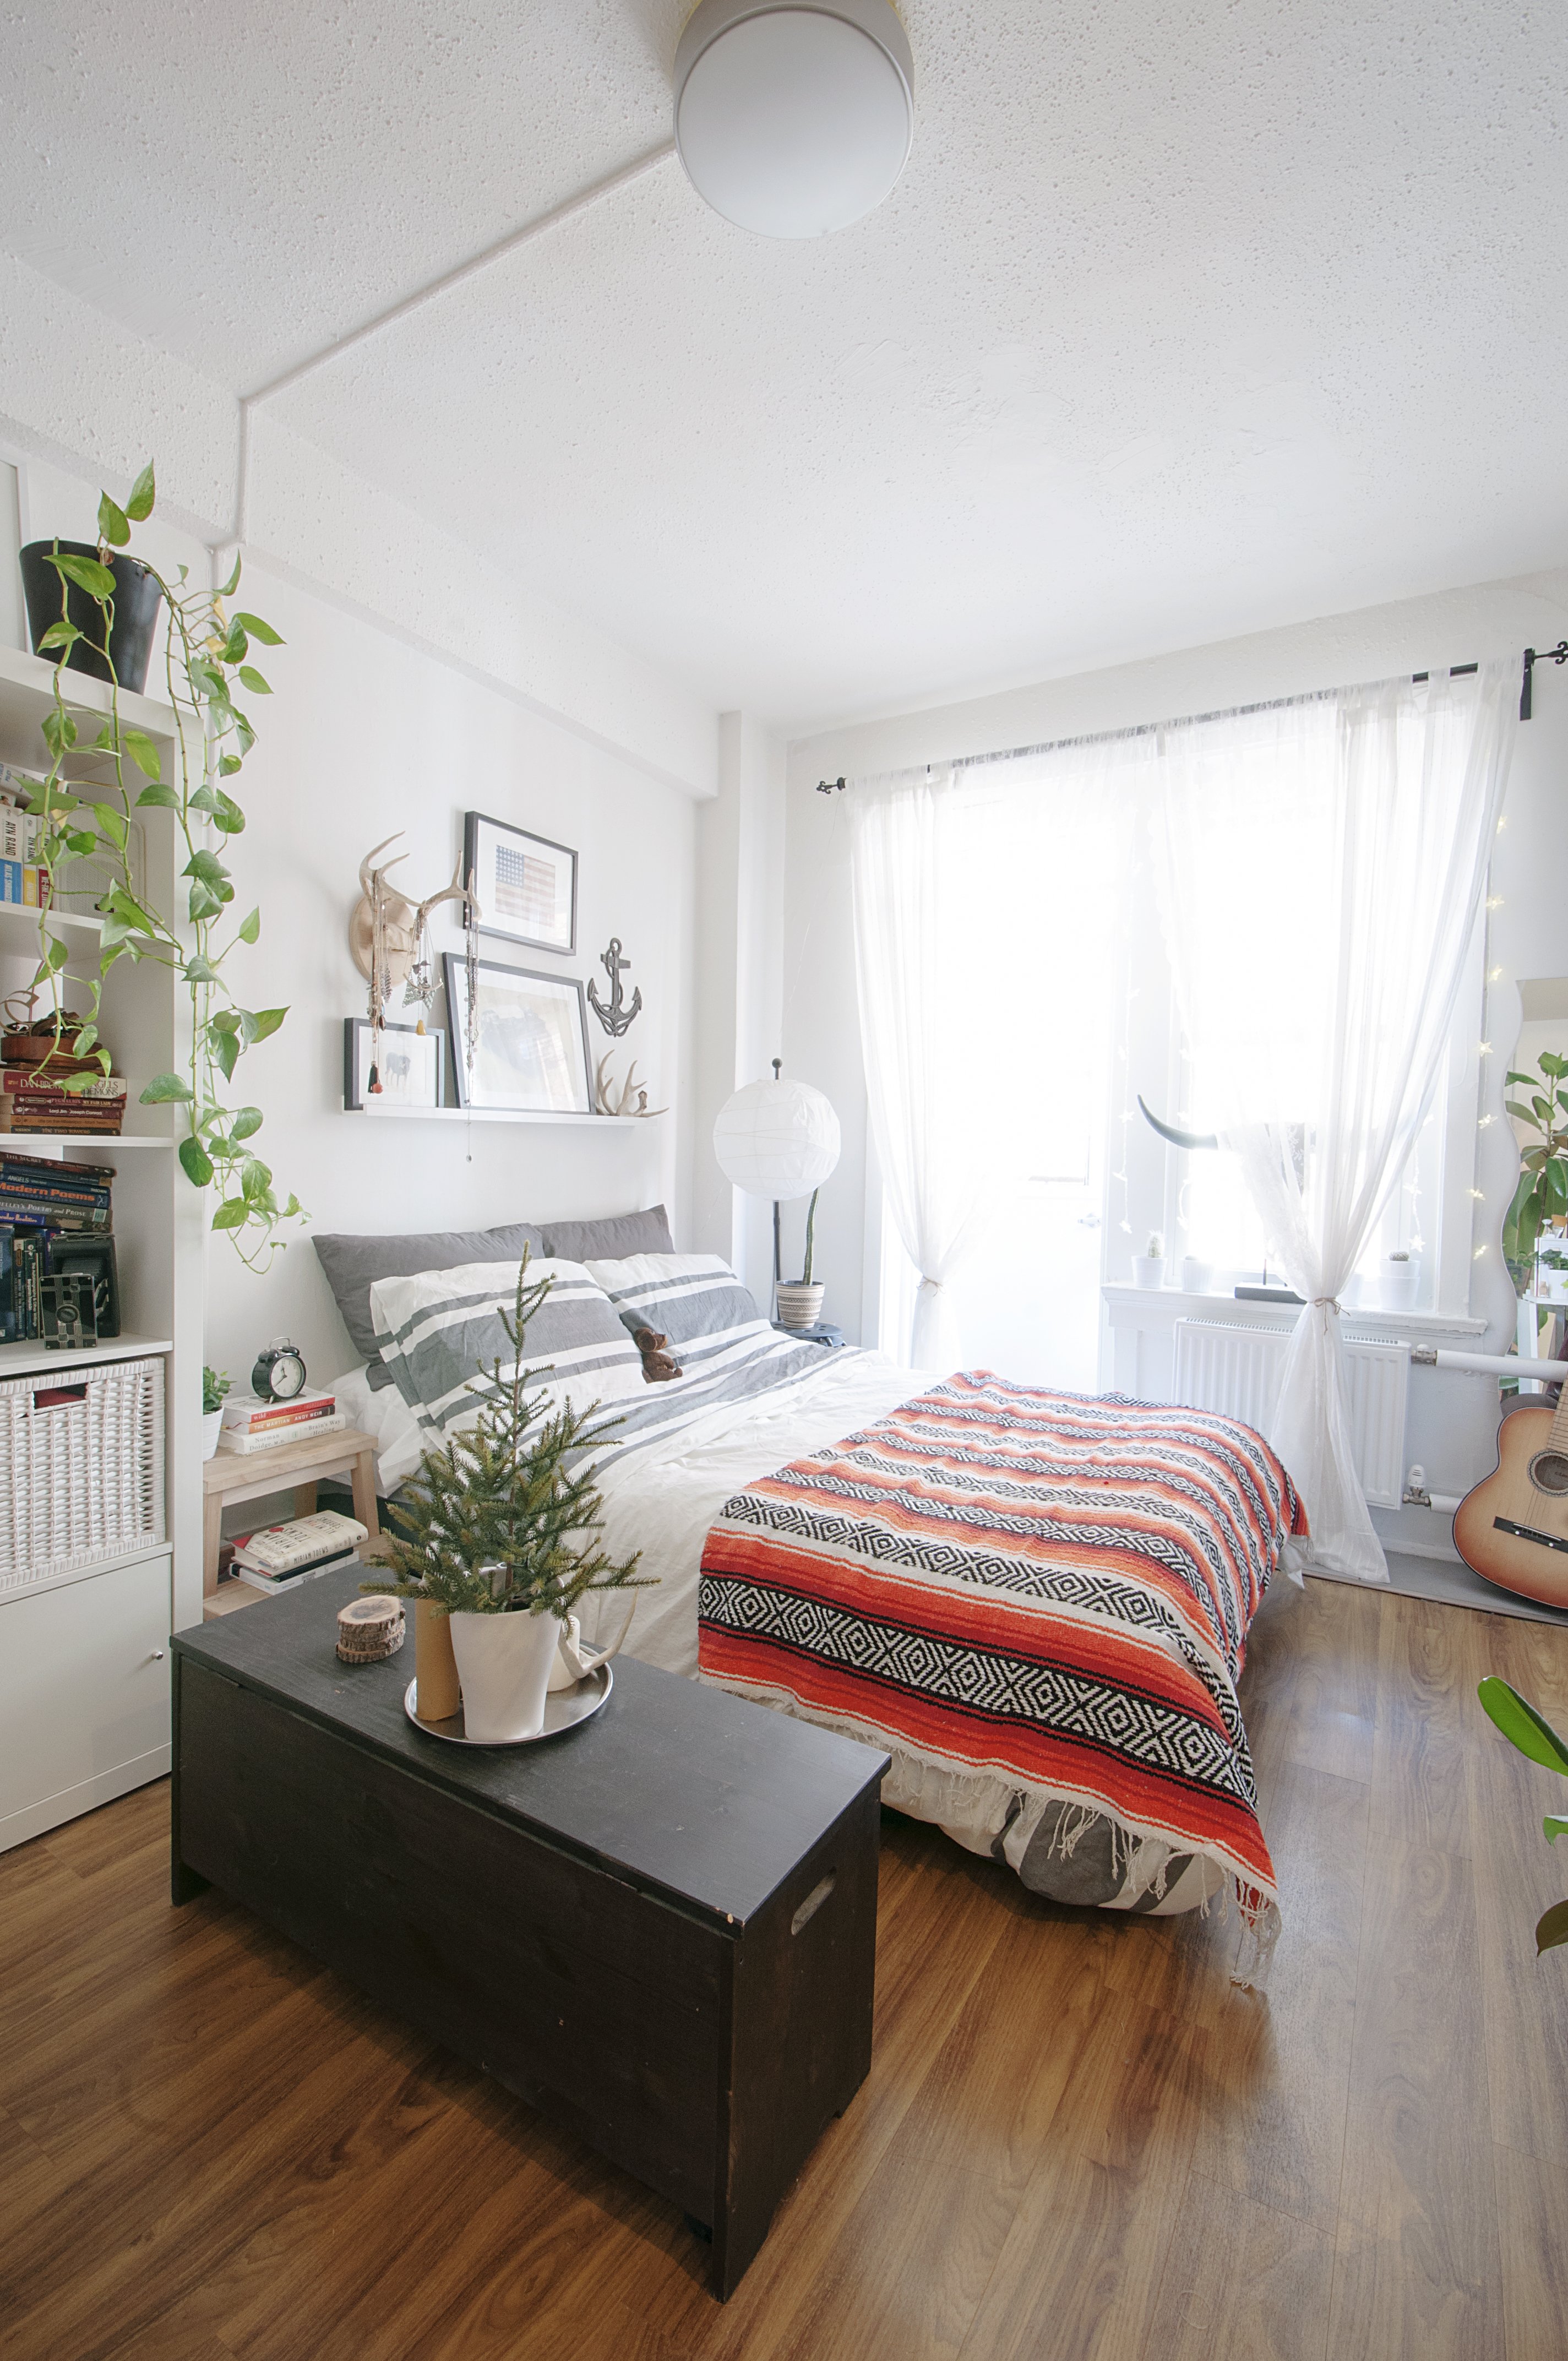 5 Ways to Lay Out a Studio Apartment | Apartment Therapy